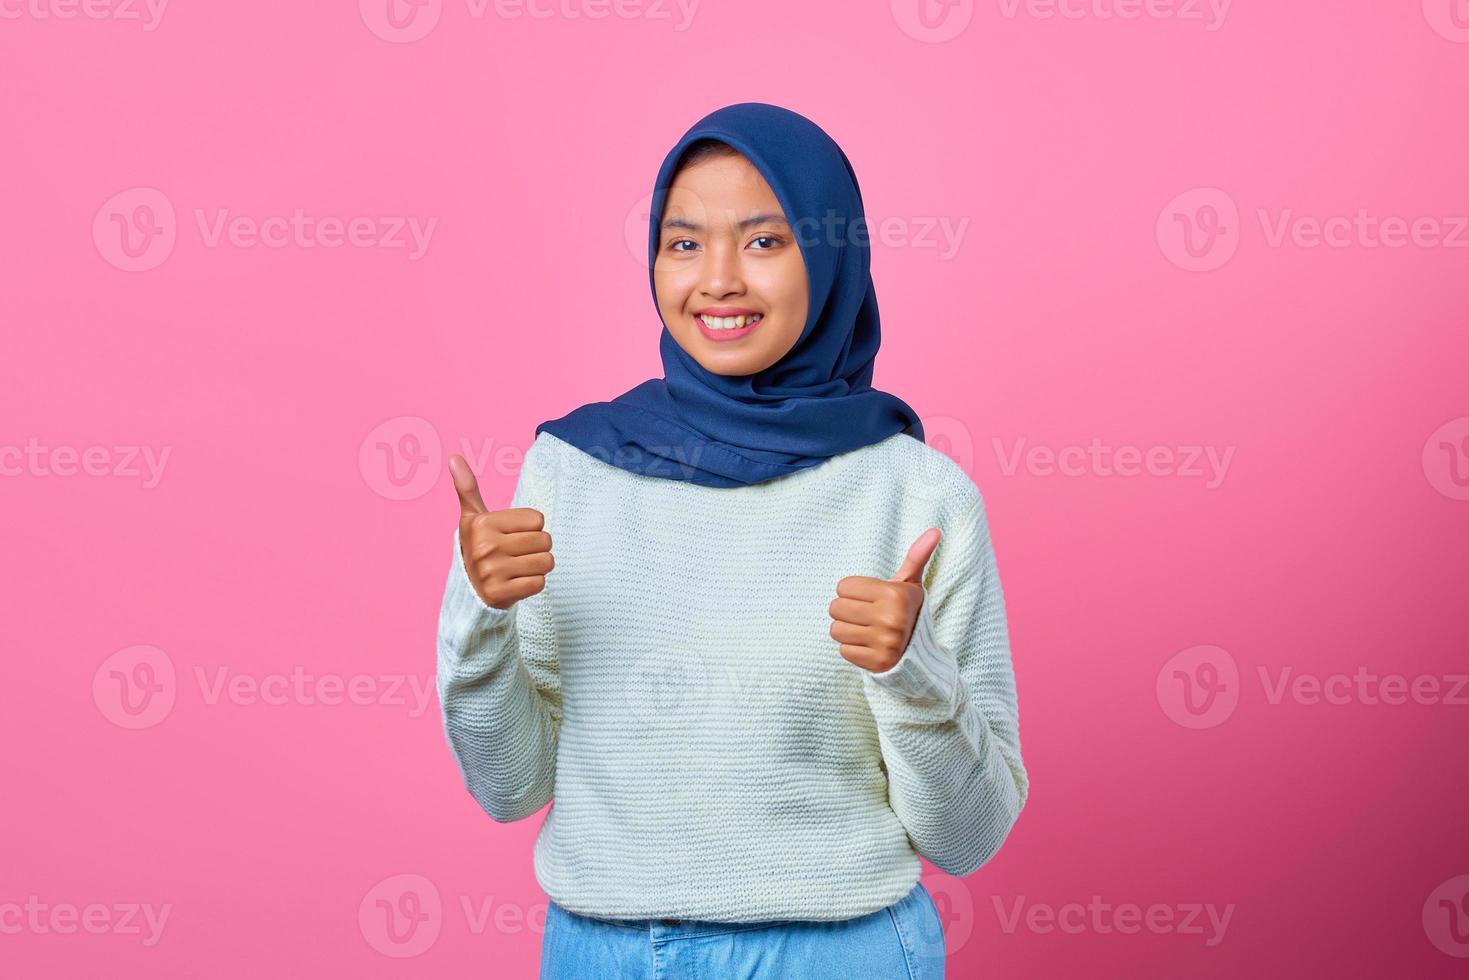 Portrait of cheerful young Asian woman showing thumbs up or approval sign photo